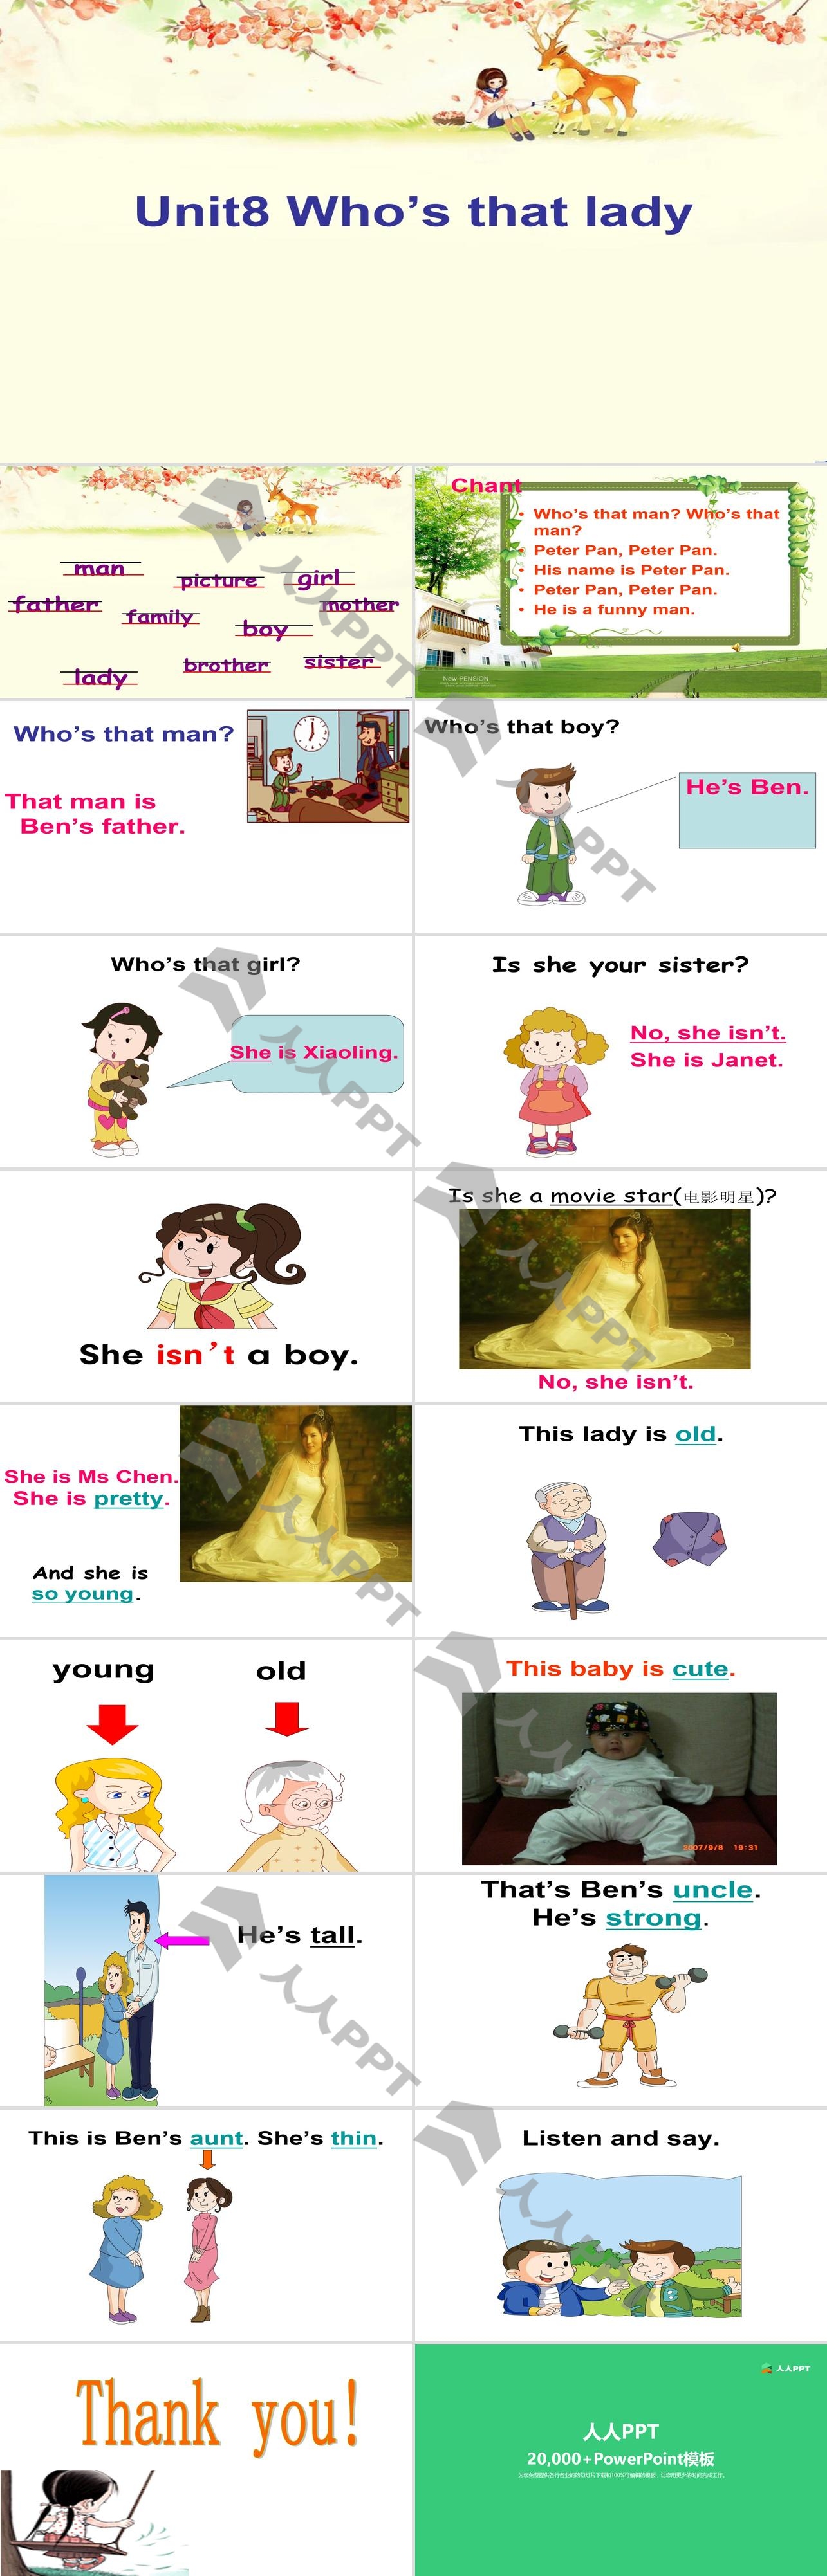 《Who's that lady?》PPT课件长图